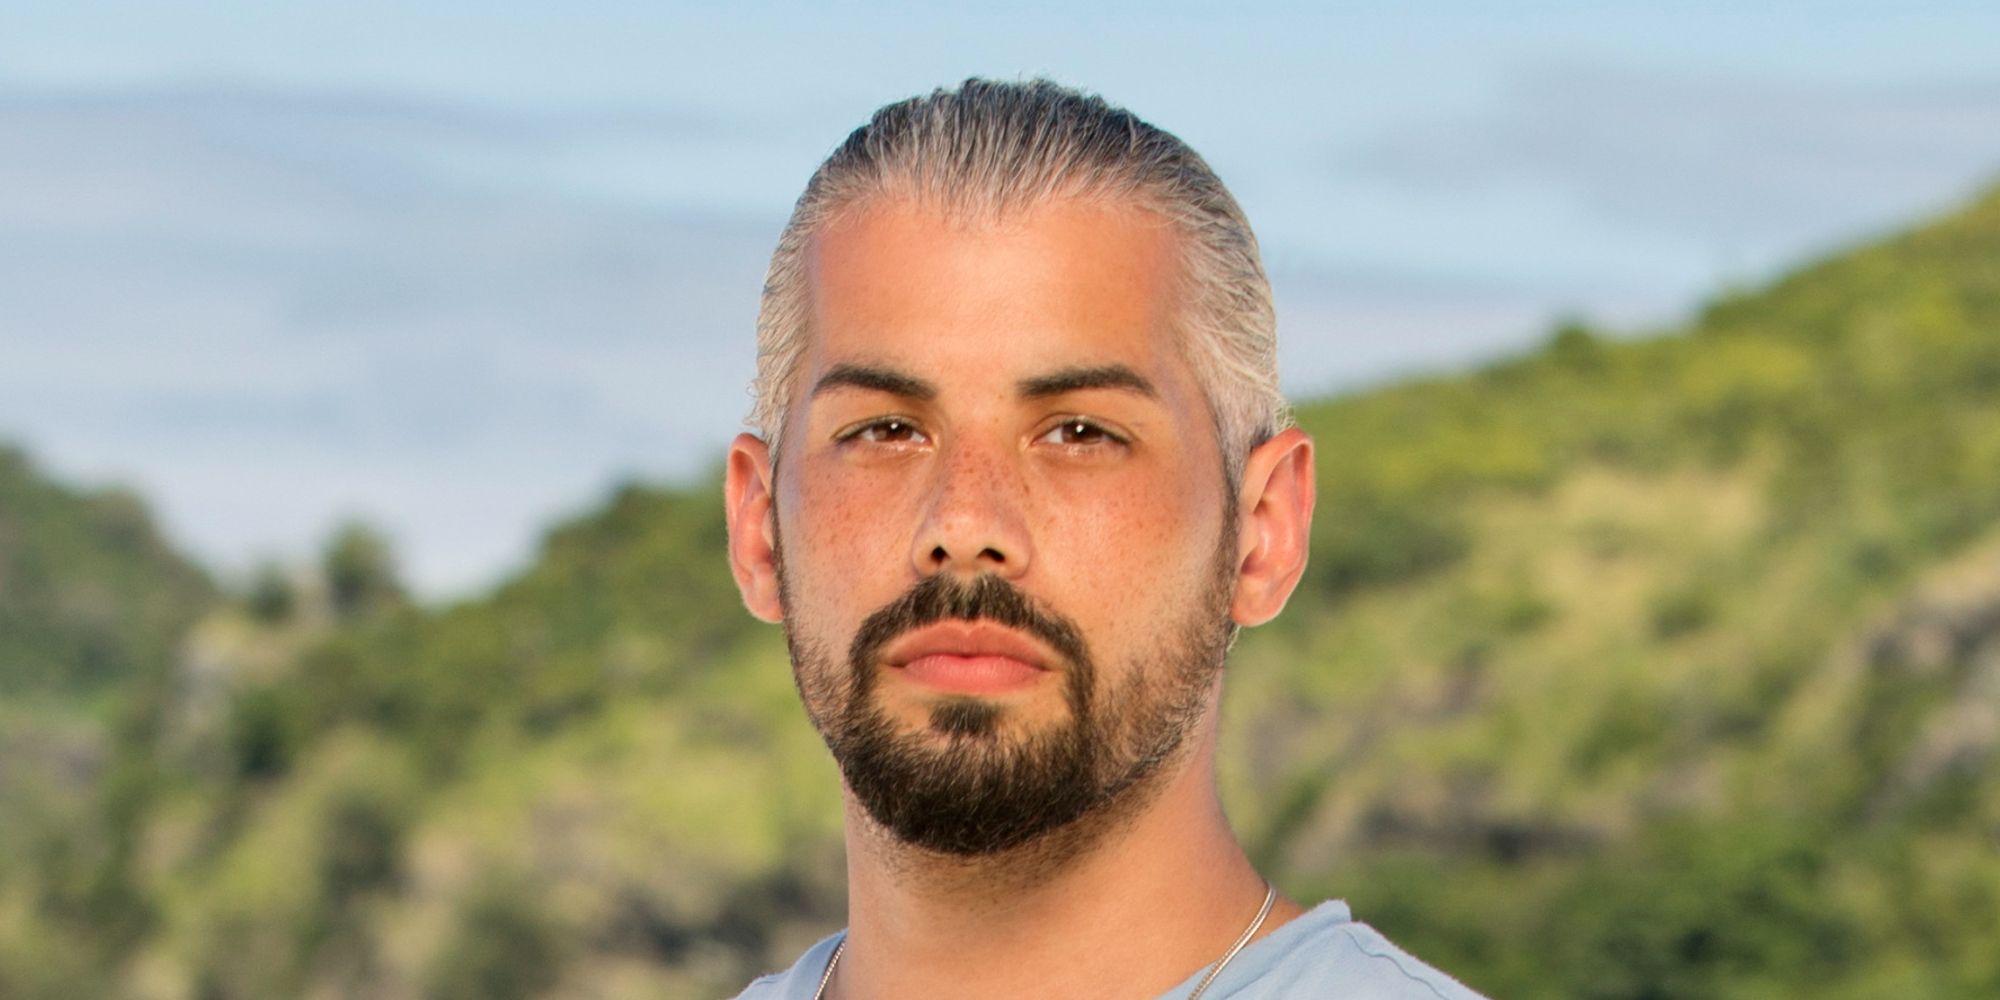 Ricard Foye looking at the camera with a serious expression in Survivor season 41